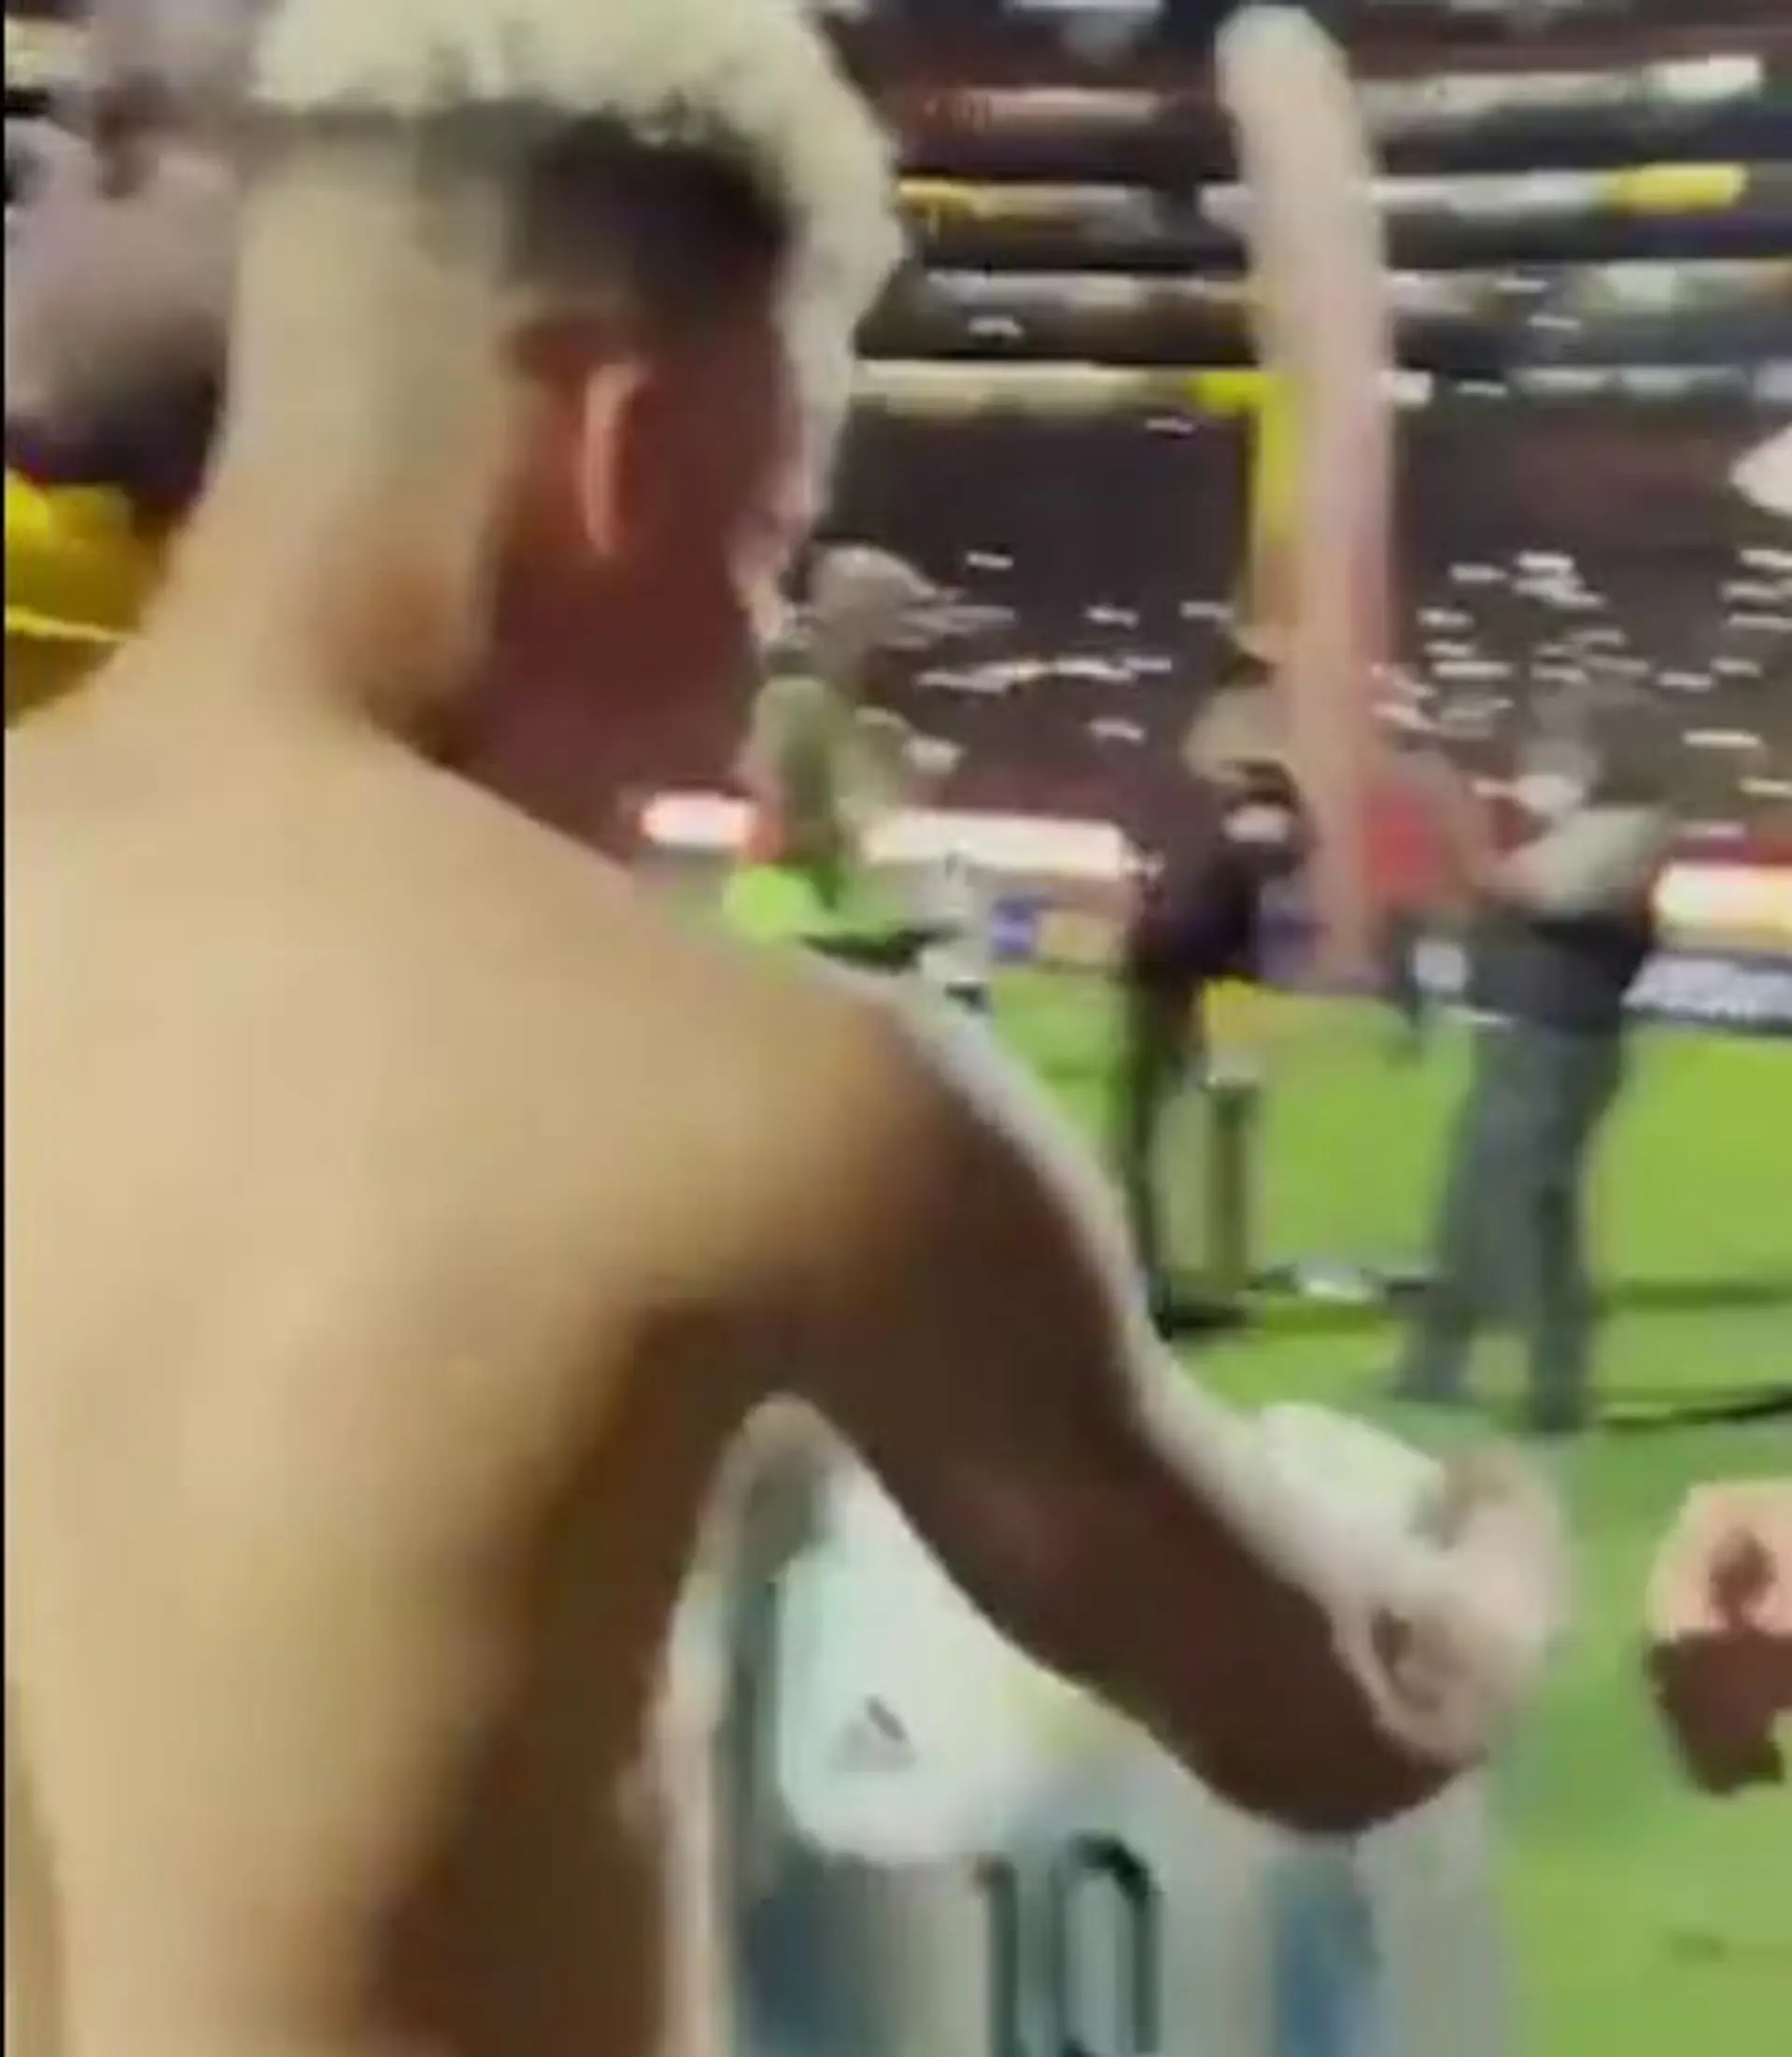 d7ceb7d6 313b 4d53 8896 6adc411da94f?width=1920&quality=75 Ecuadorian player's reaction to getting Messi's shirt is wholesome